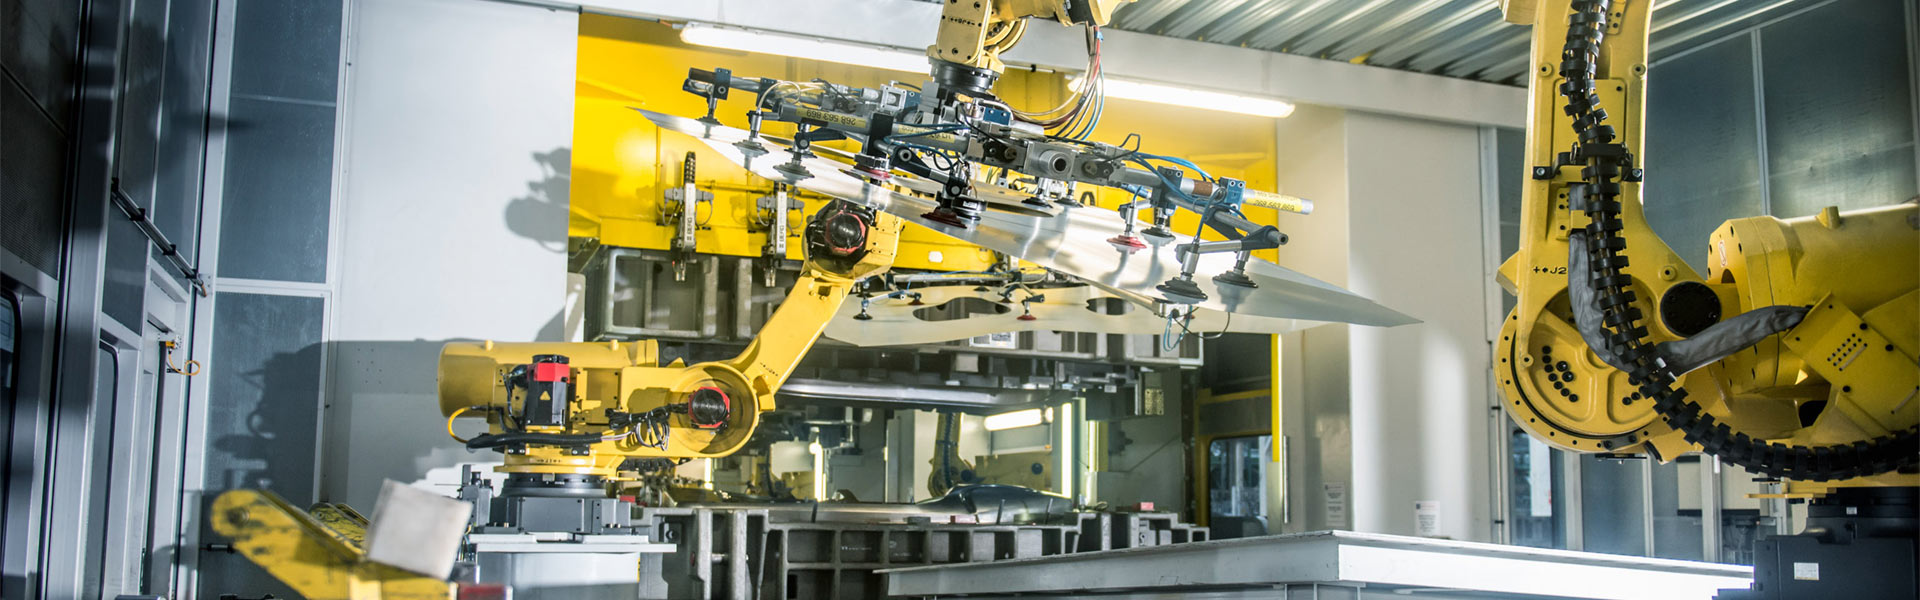 How Manufacturers Supercharge Massive Supply Chain Advantage with Industry 4.0